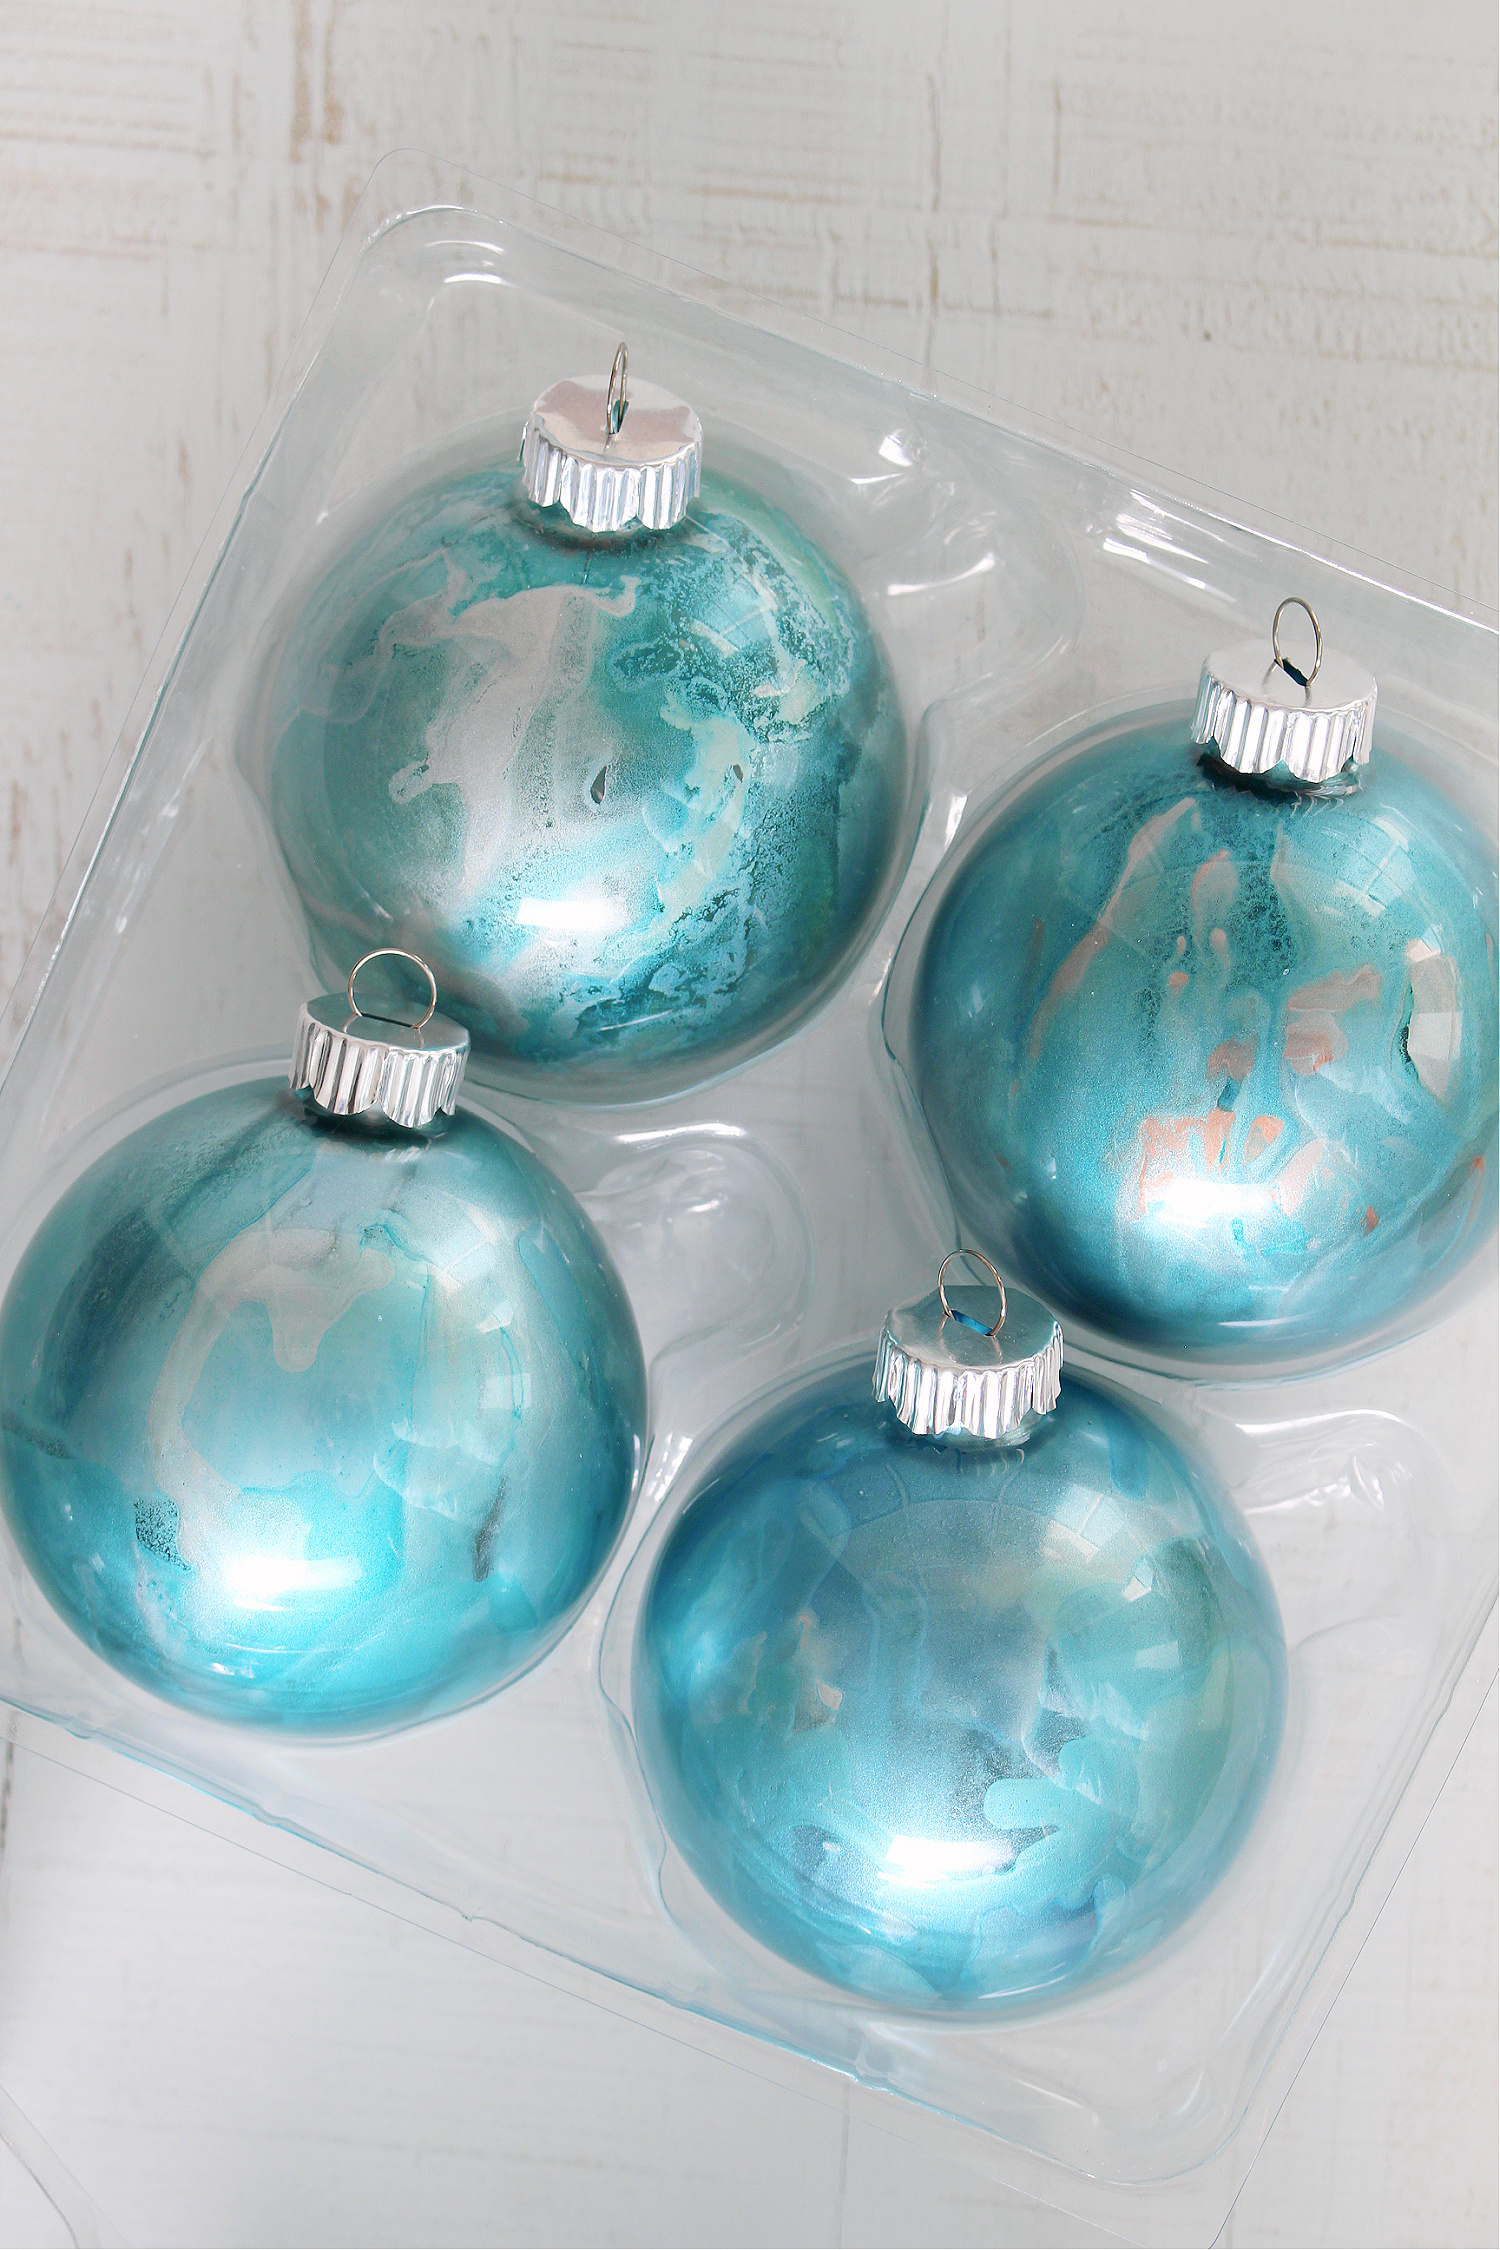 How Do You Hand Paint Ornaments?